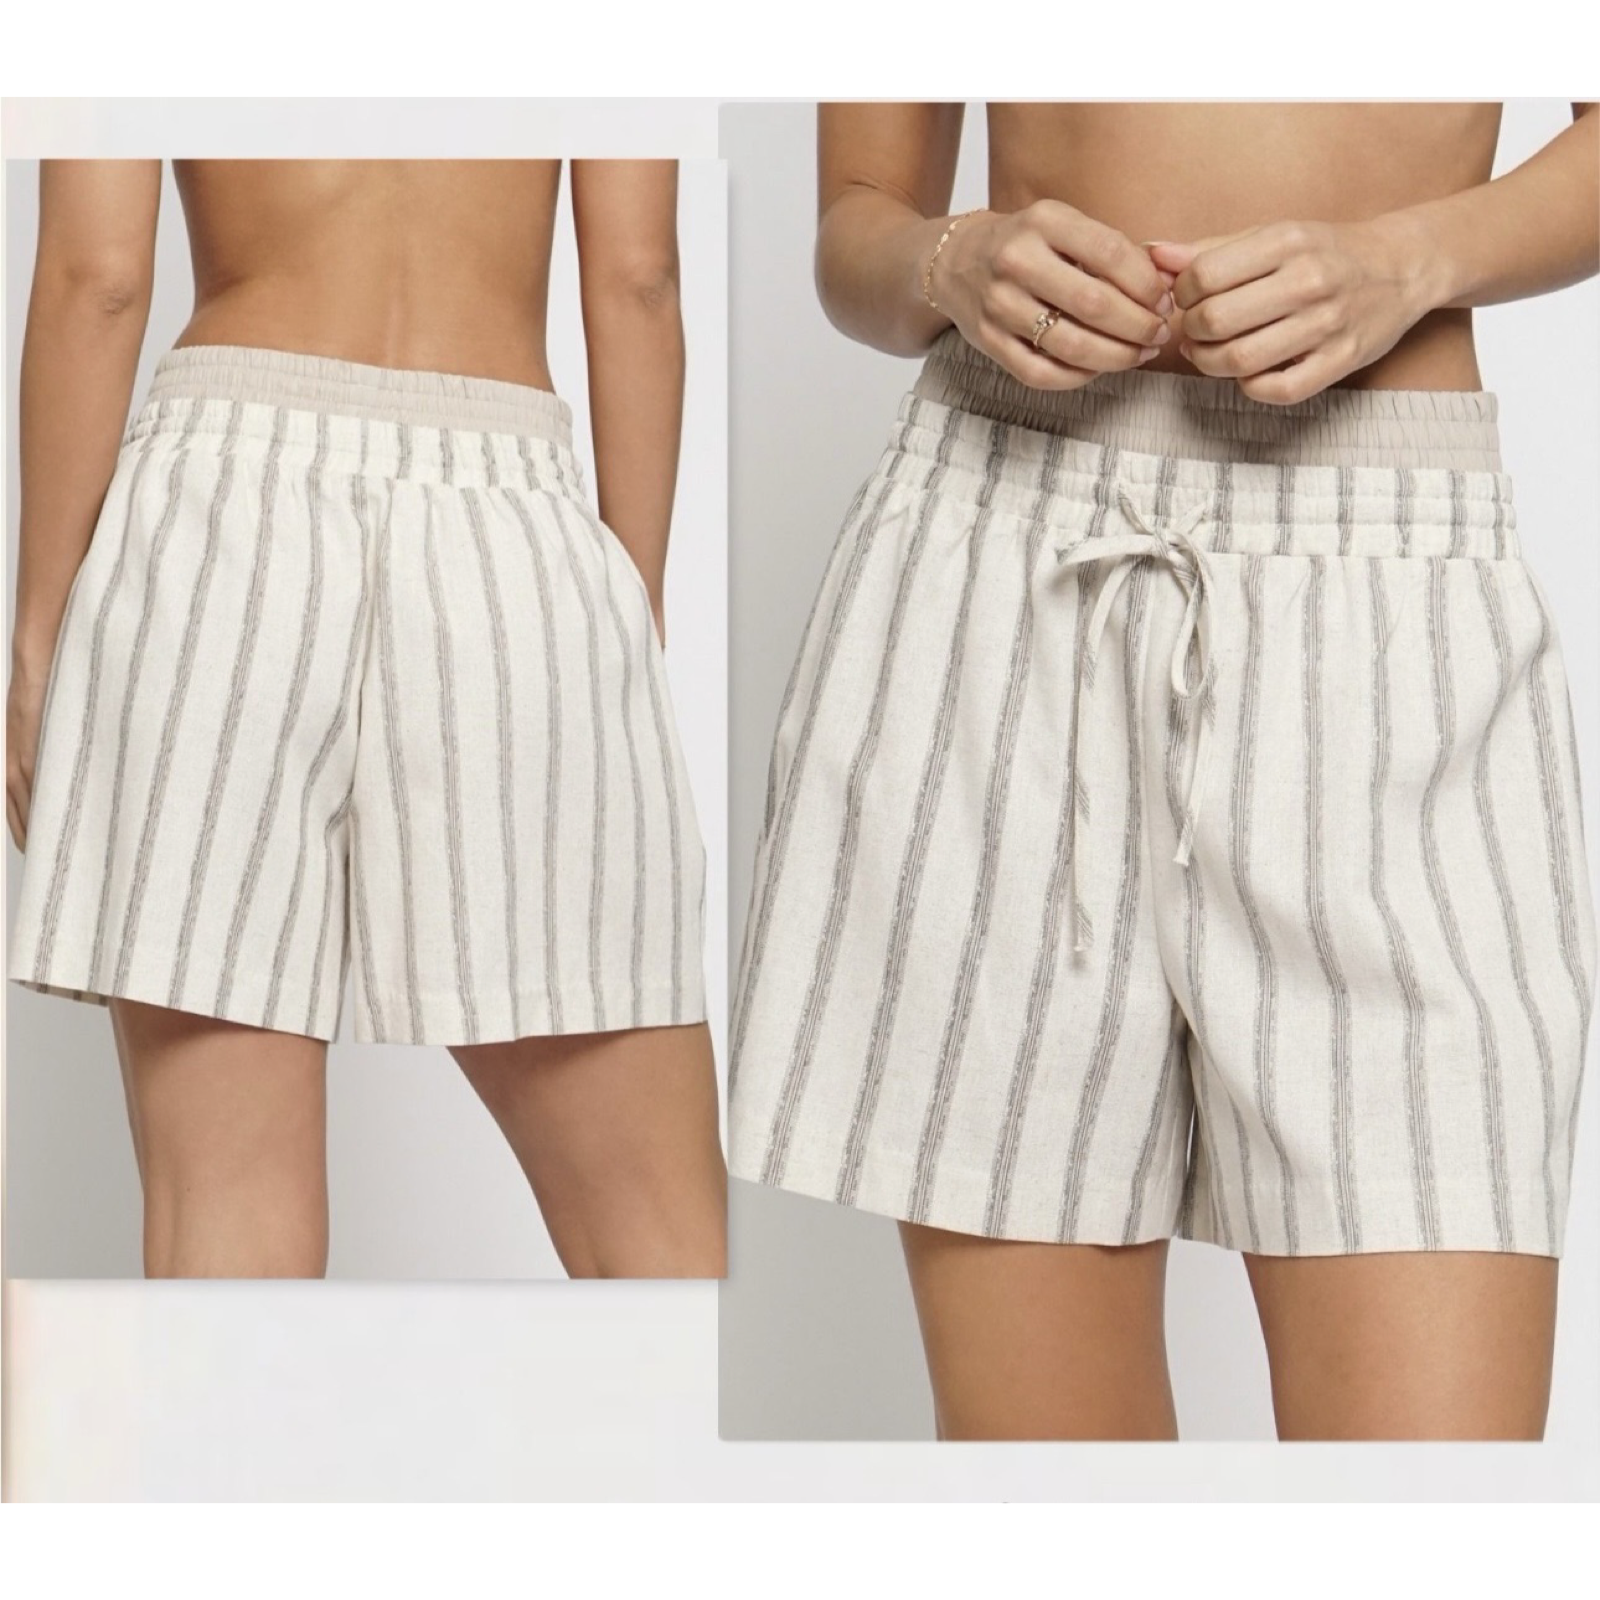 Natural striped line shorts